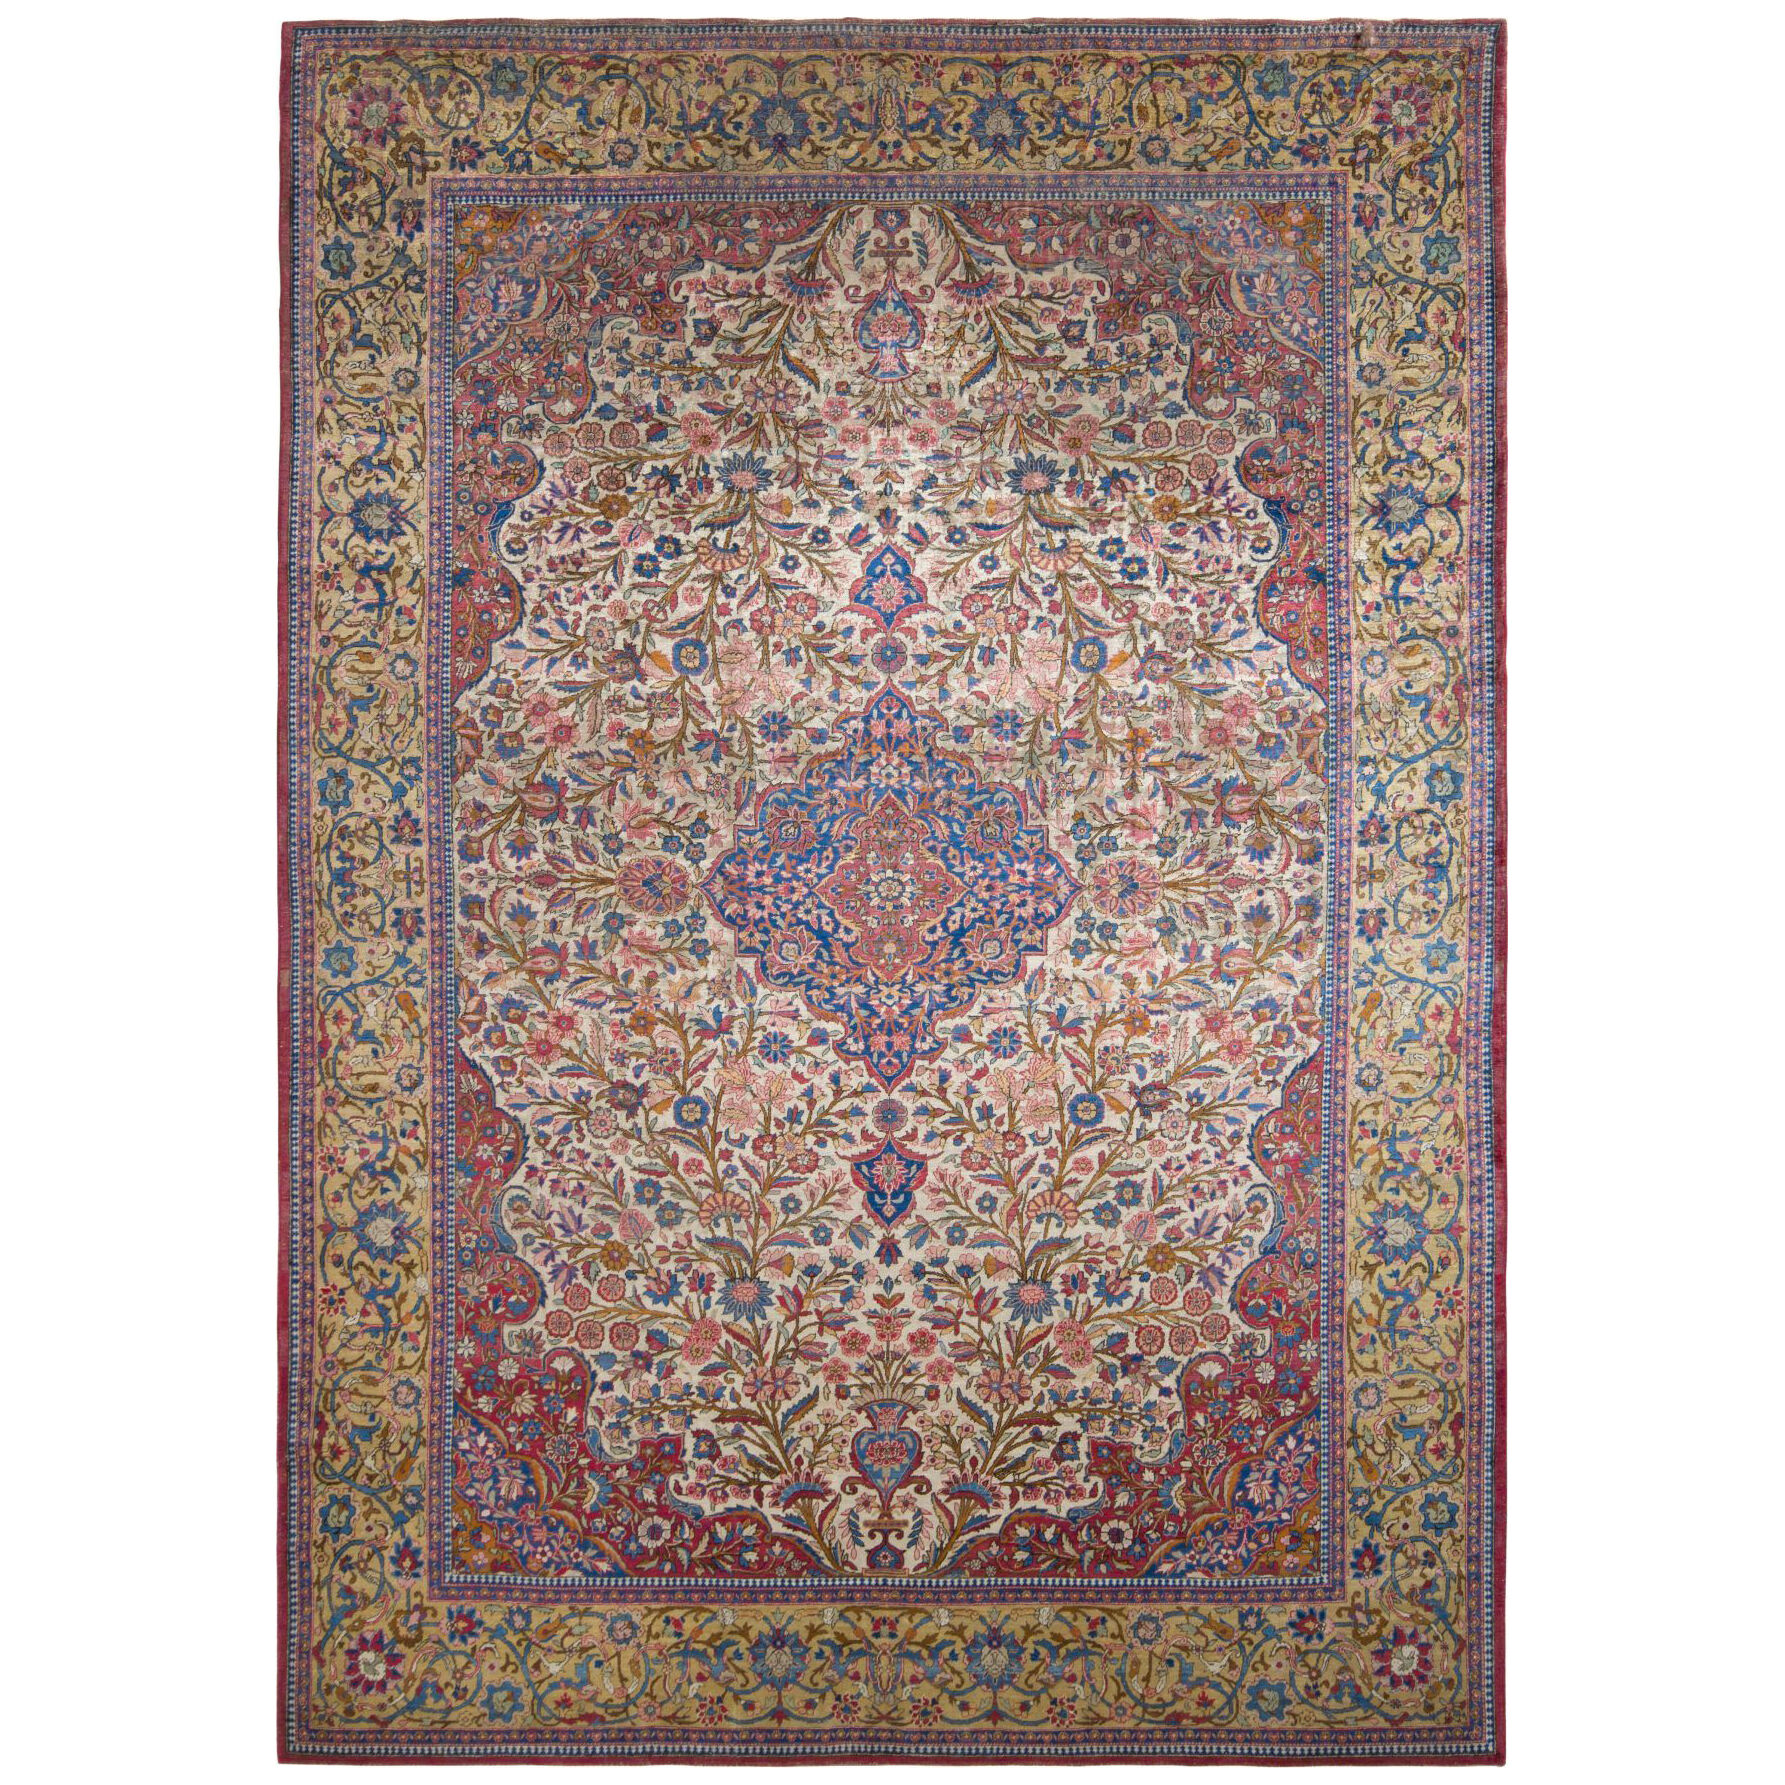 Hand-knotted Persian Kashan Rug in red and gold, 1910 from Rug & Kilim – Effect Magazine